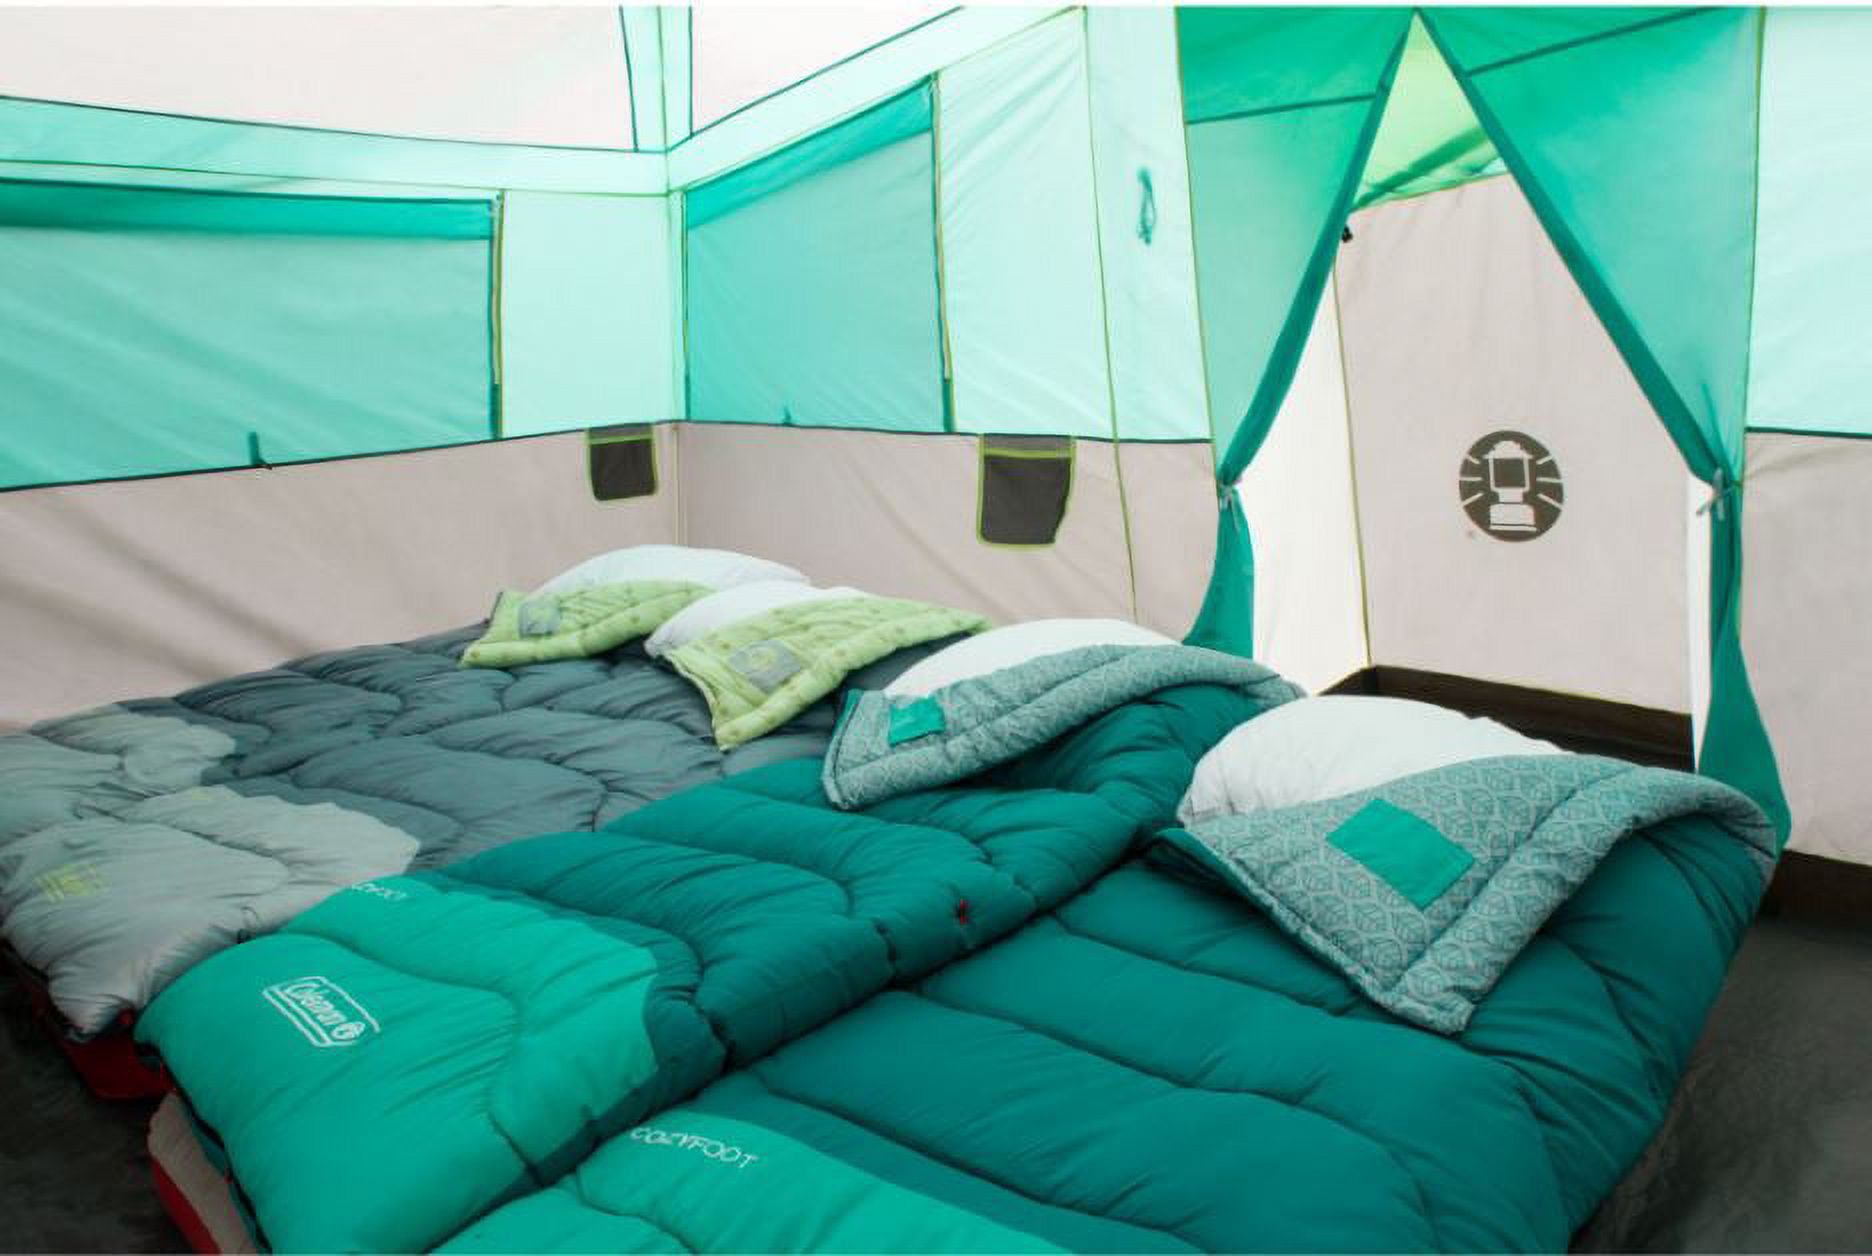 Coleman Tenaya Lake 8 Person Lighted Fast Pitch Cabin Tent, 1 Room, Teal - image 4 of 5